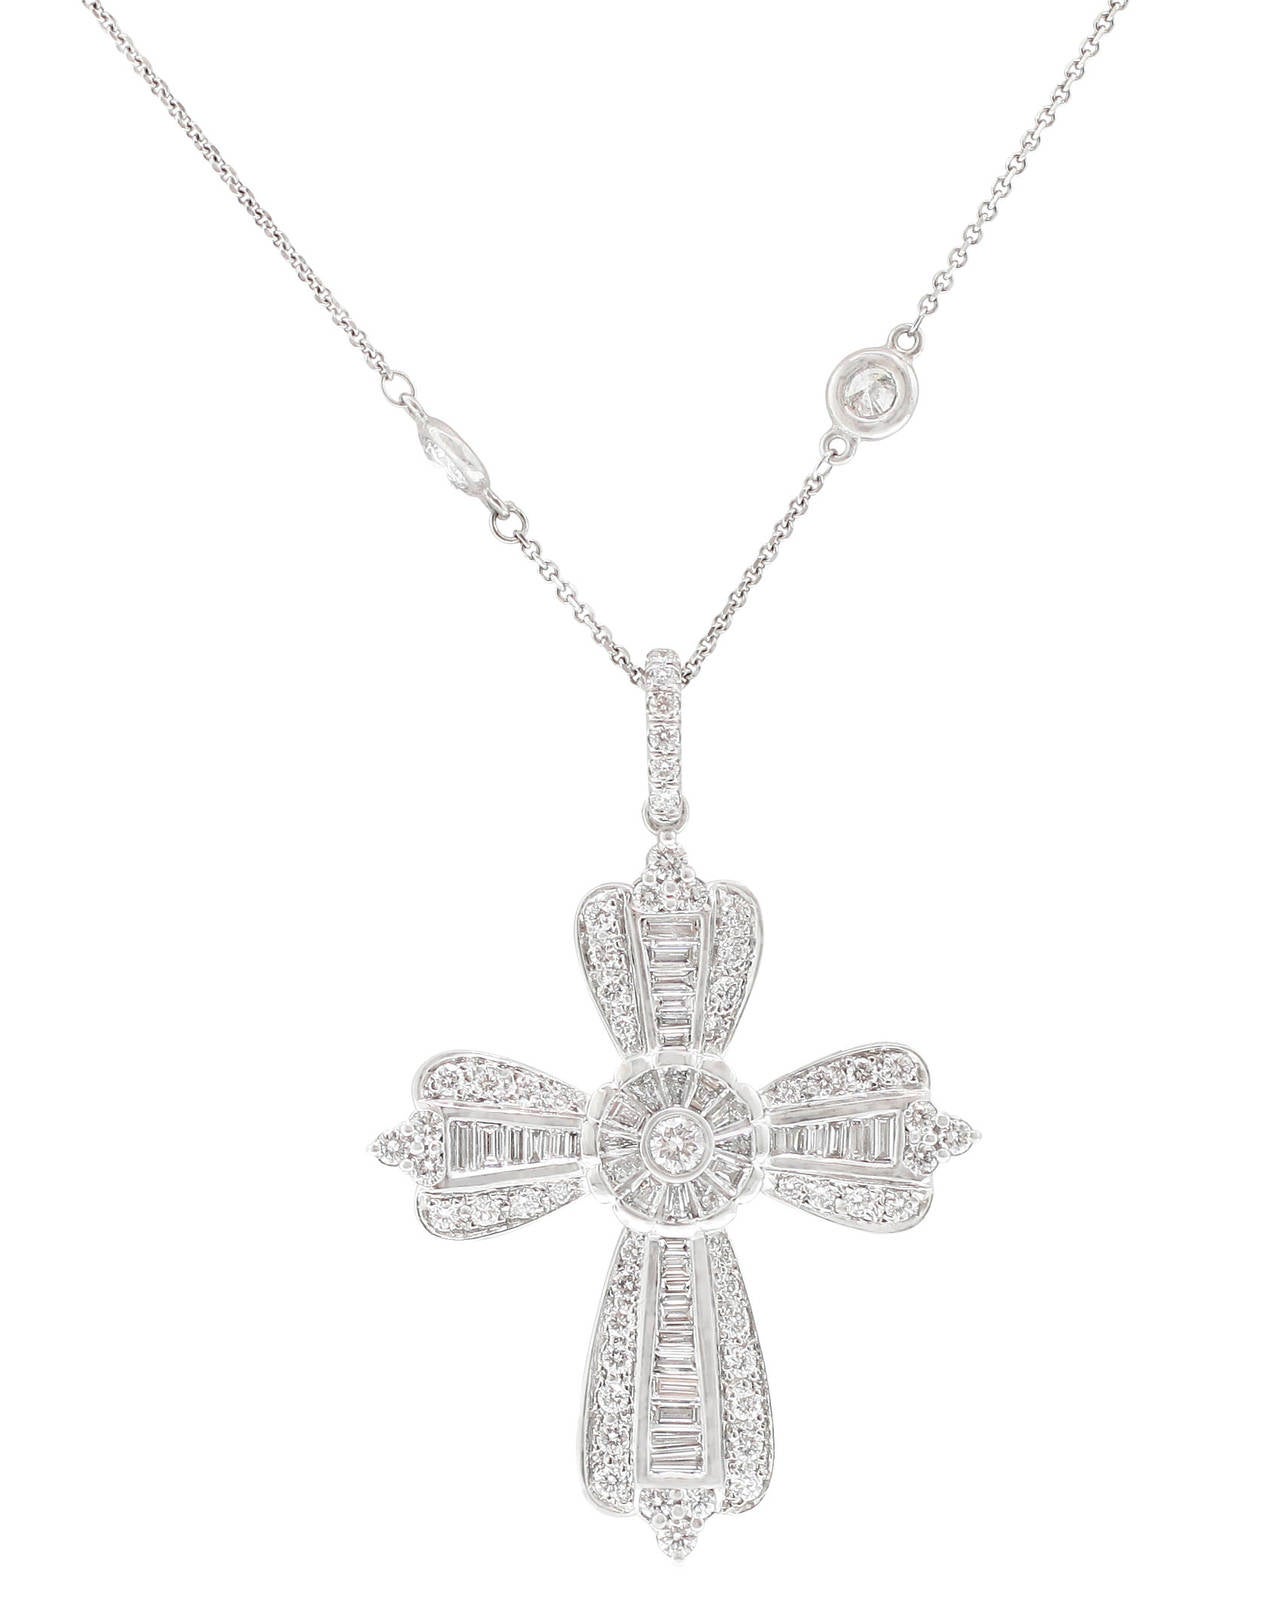 This most incredible Custom Diamond Cross Pendant features a center of tapered baguette diamonds in bezel settings with bead-set round brilliant-cut diamonds outlining the bezels, and creating a fluted edge. A larger round diamond anchors the center